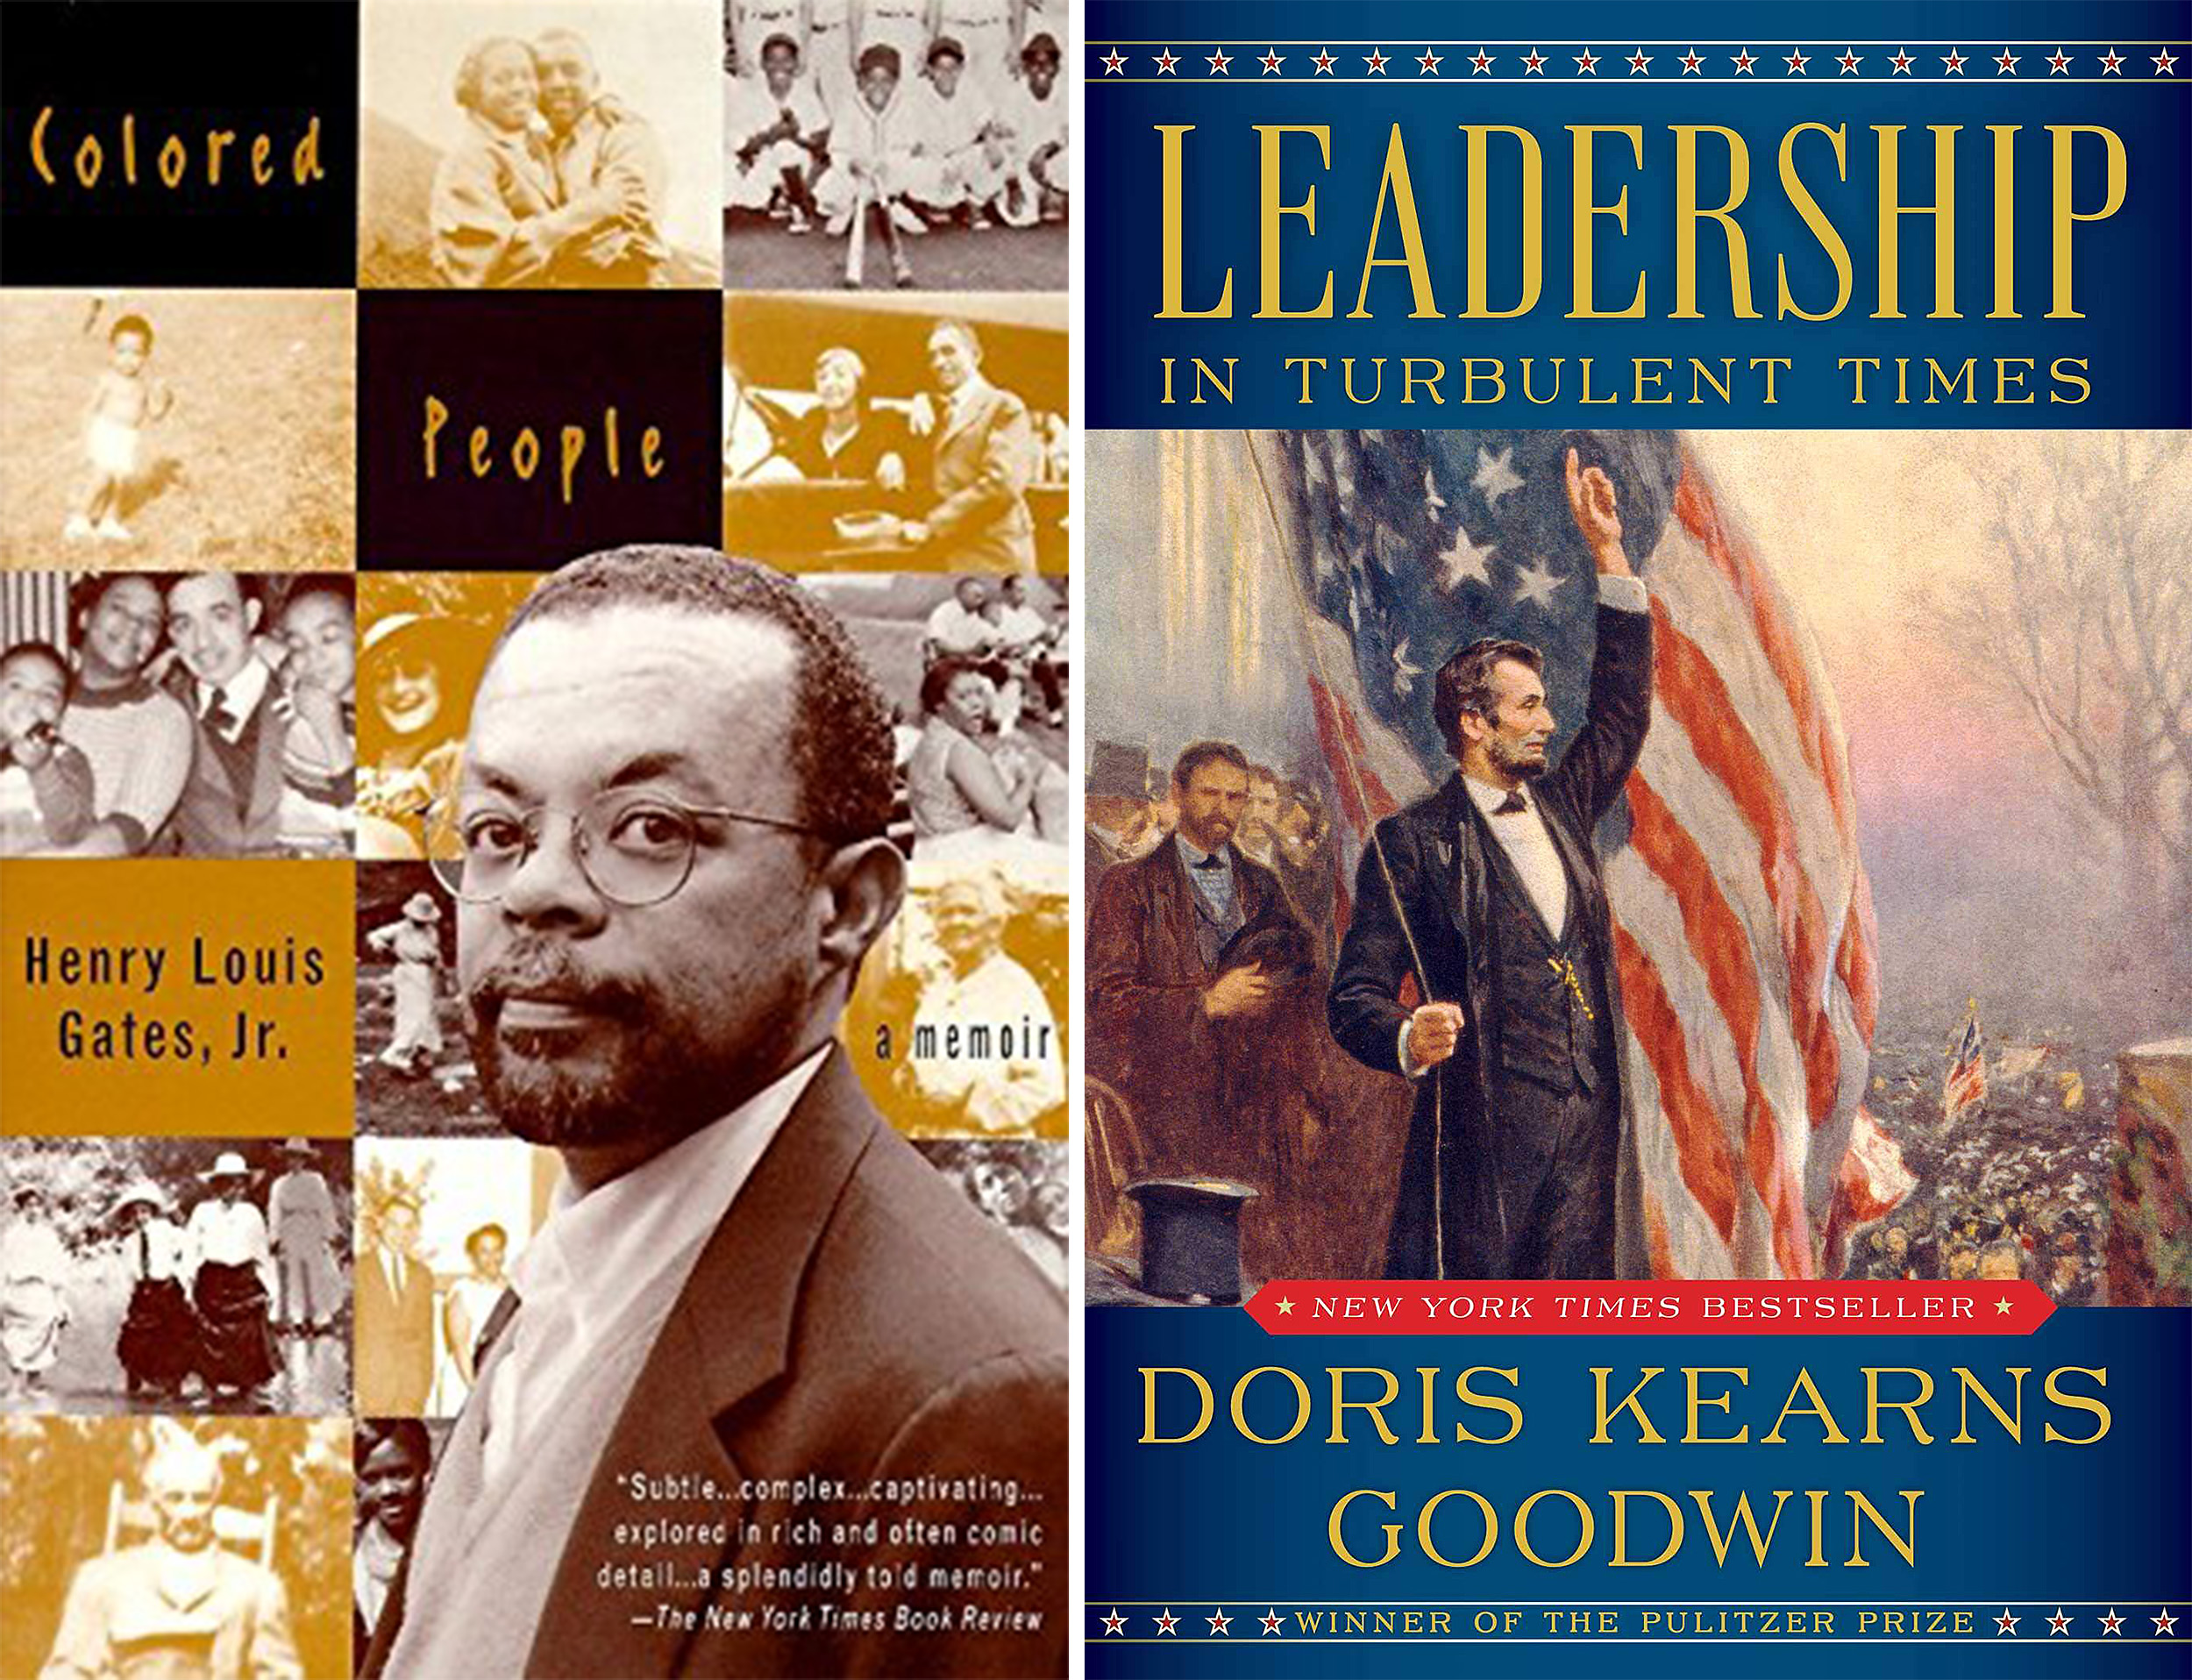 Colored People and Leadership book covers